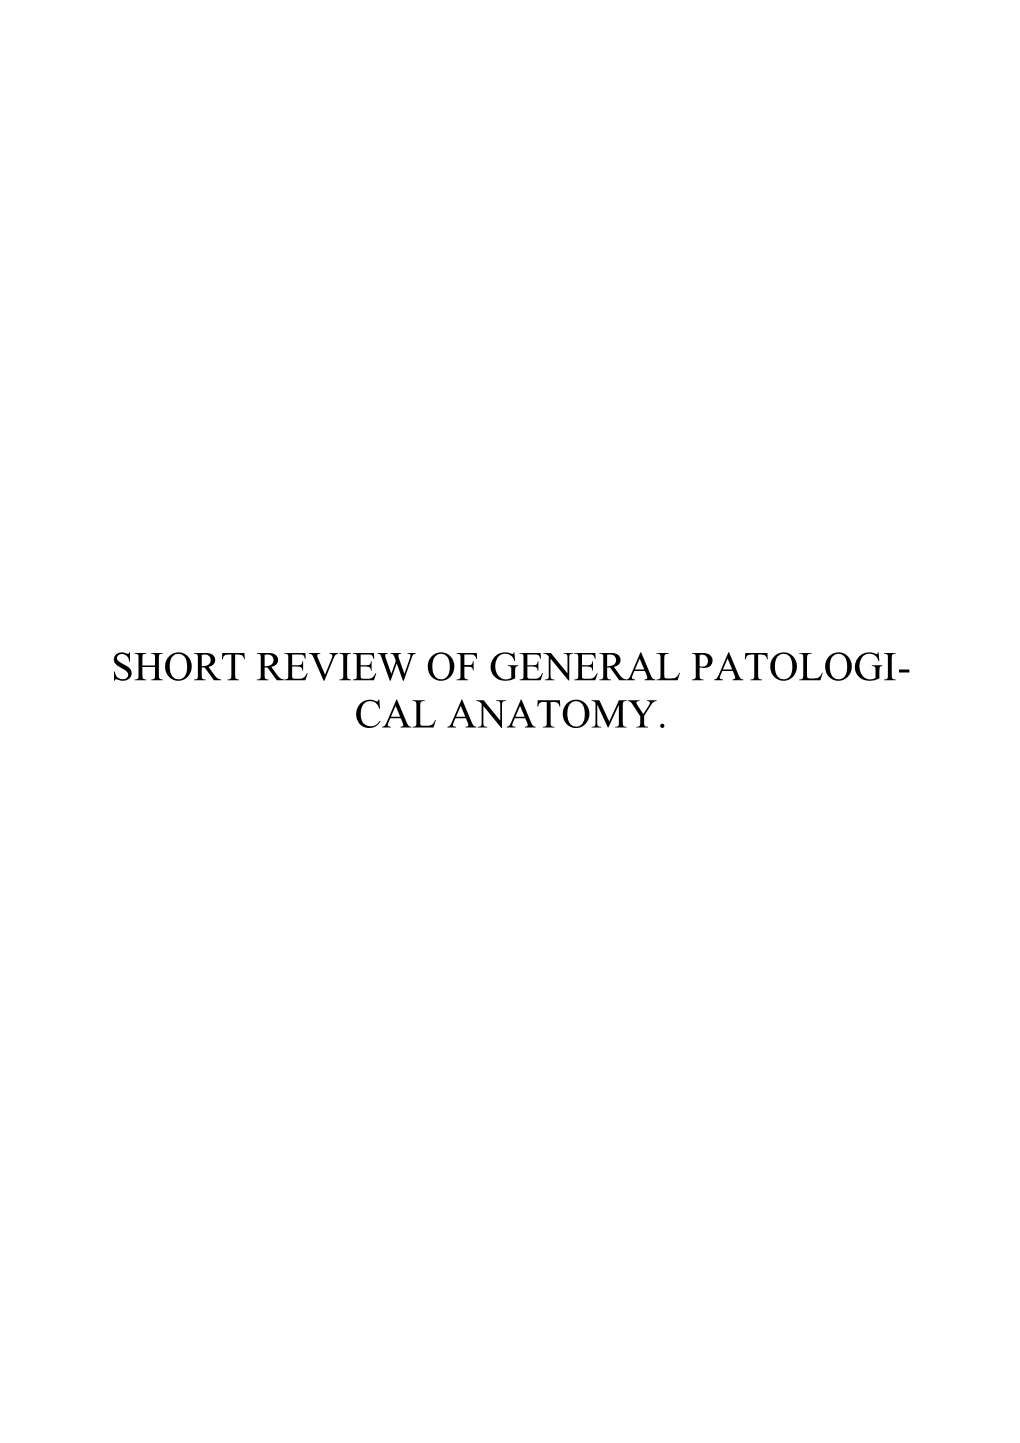 Short Review of General Pa-Tological Anatomy with Guide to Laboratory Practice